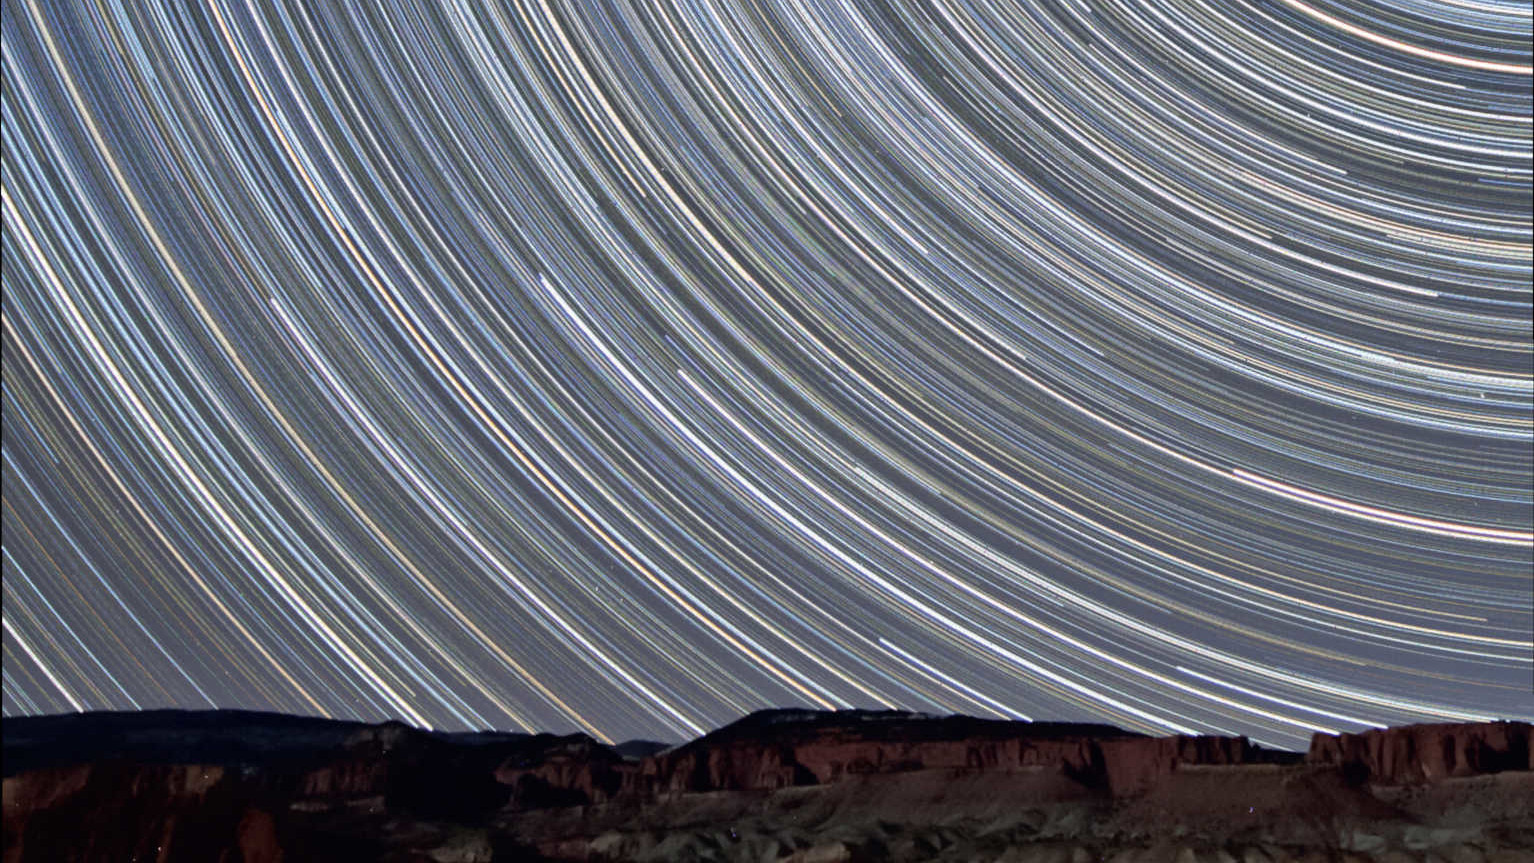 A few miles from the Capitol Reef National Park in Utah (USA), these star trail shots were taken looking north, showing the movement of stars over the red sandstone rock lit by the waxing Moon. This composite image consists of 350 shots with an exposure time of 90 seconds each (total exposure time: 525 minutes = 8.75 hours). The resulting image was created with a 10-20mm lens (at 10 mm and f/4) on a Canon 450D DSLR. U. Dittler